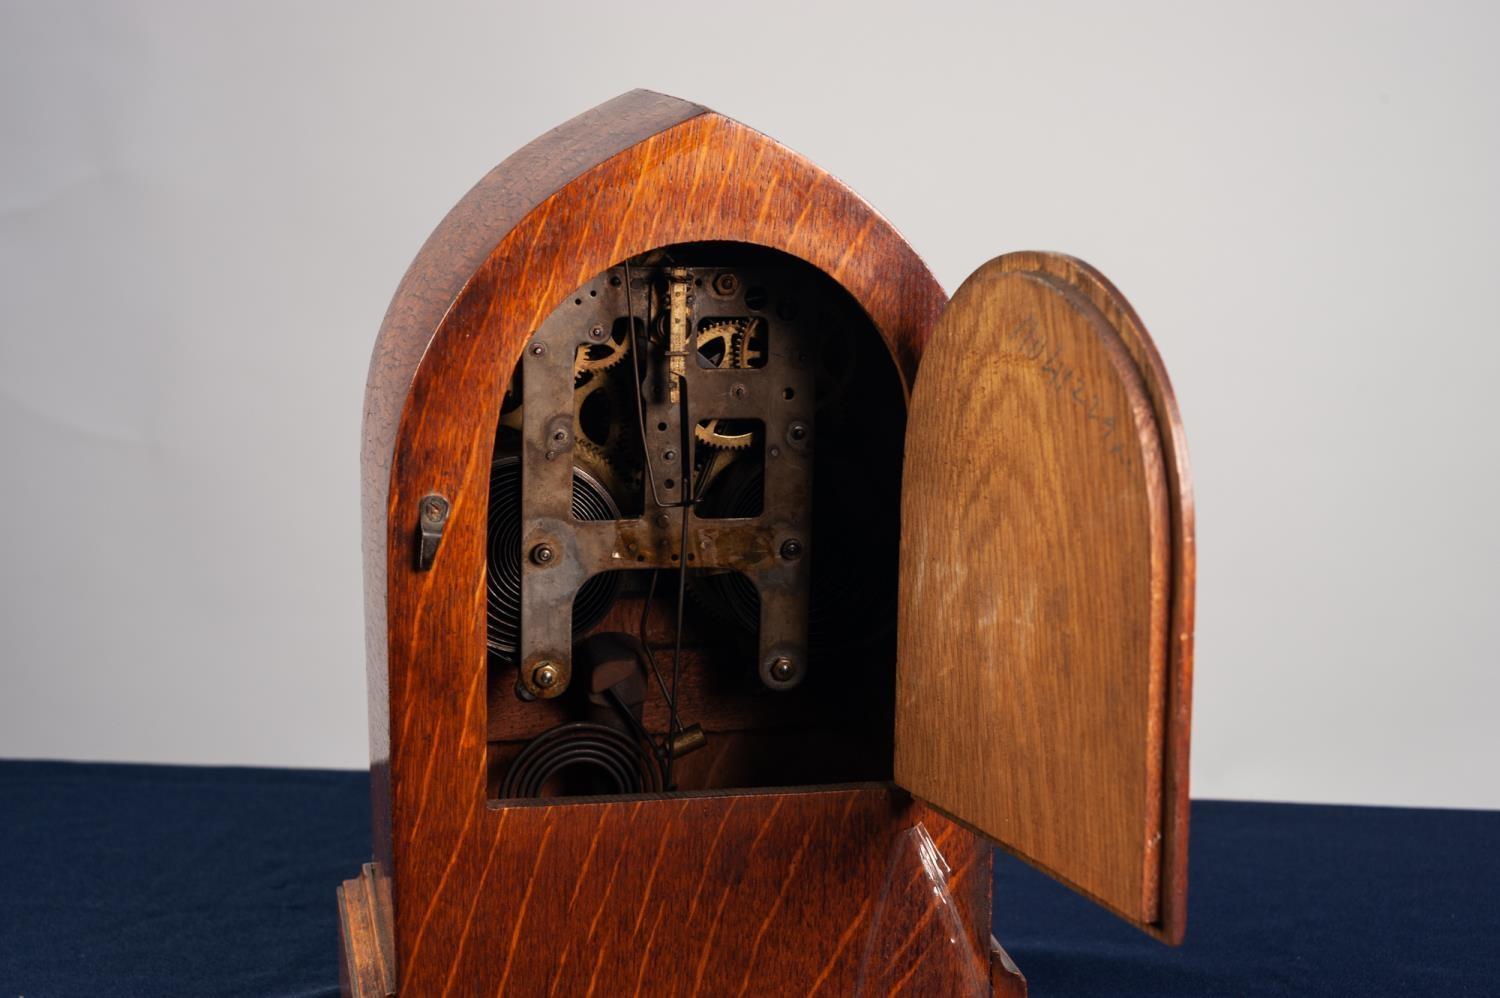 EARLY TWENTIETH CENTURY INLAID OAK LANCET TOP MANTLE CLOCK, the 5 ¼? Arabic dial powered by a - Image 3 of 3